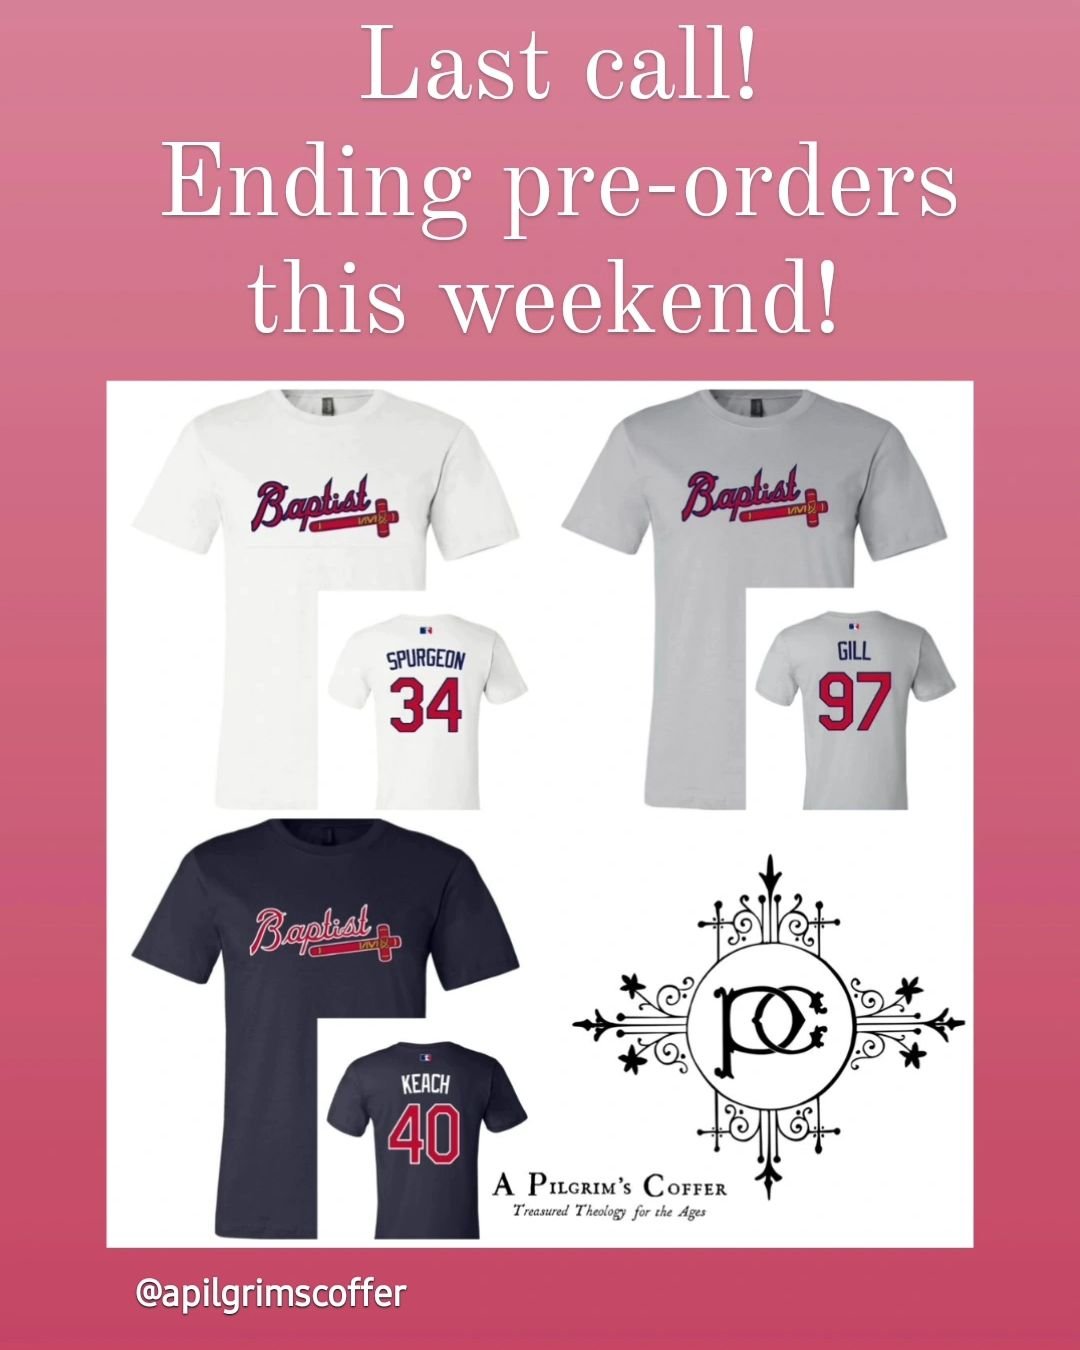 Don't miss out if this is down your alley for the baseball season!